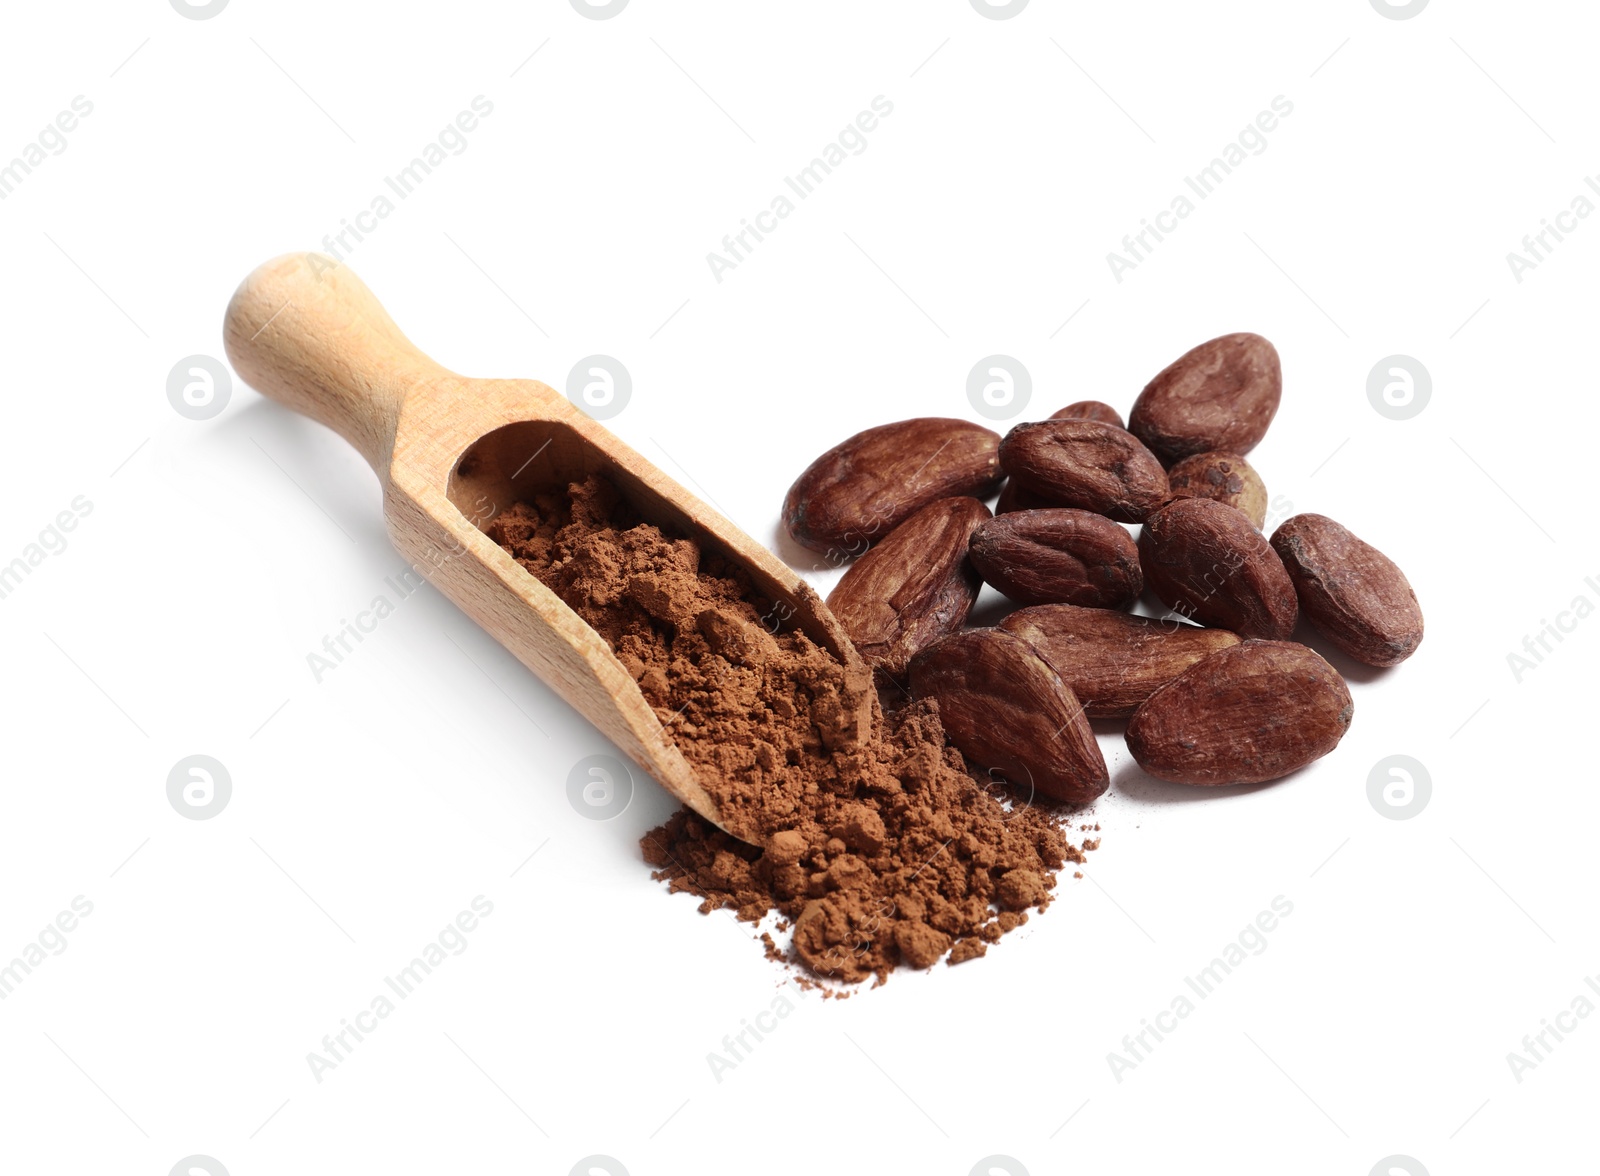 Photo of Wooden scoop, cocoa beans and powder isolated on white